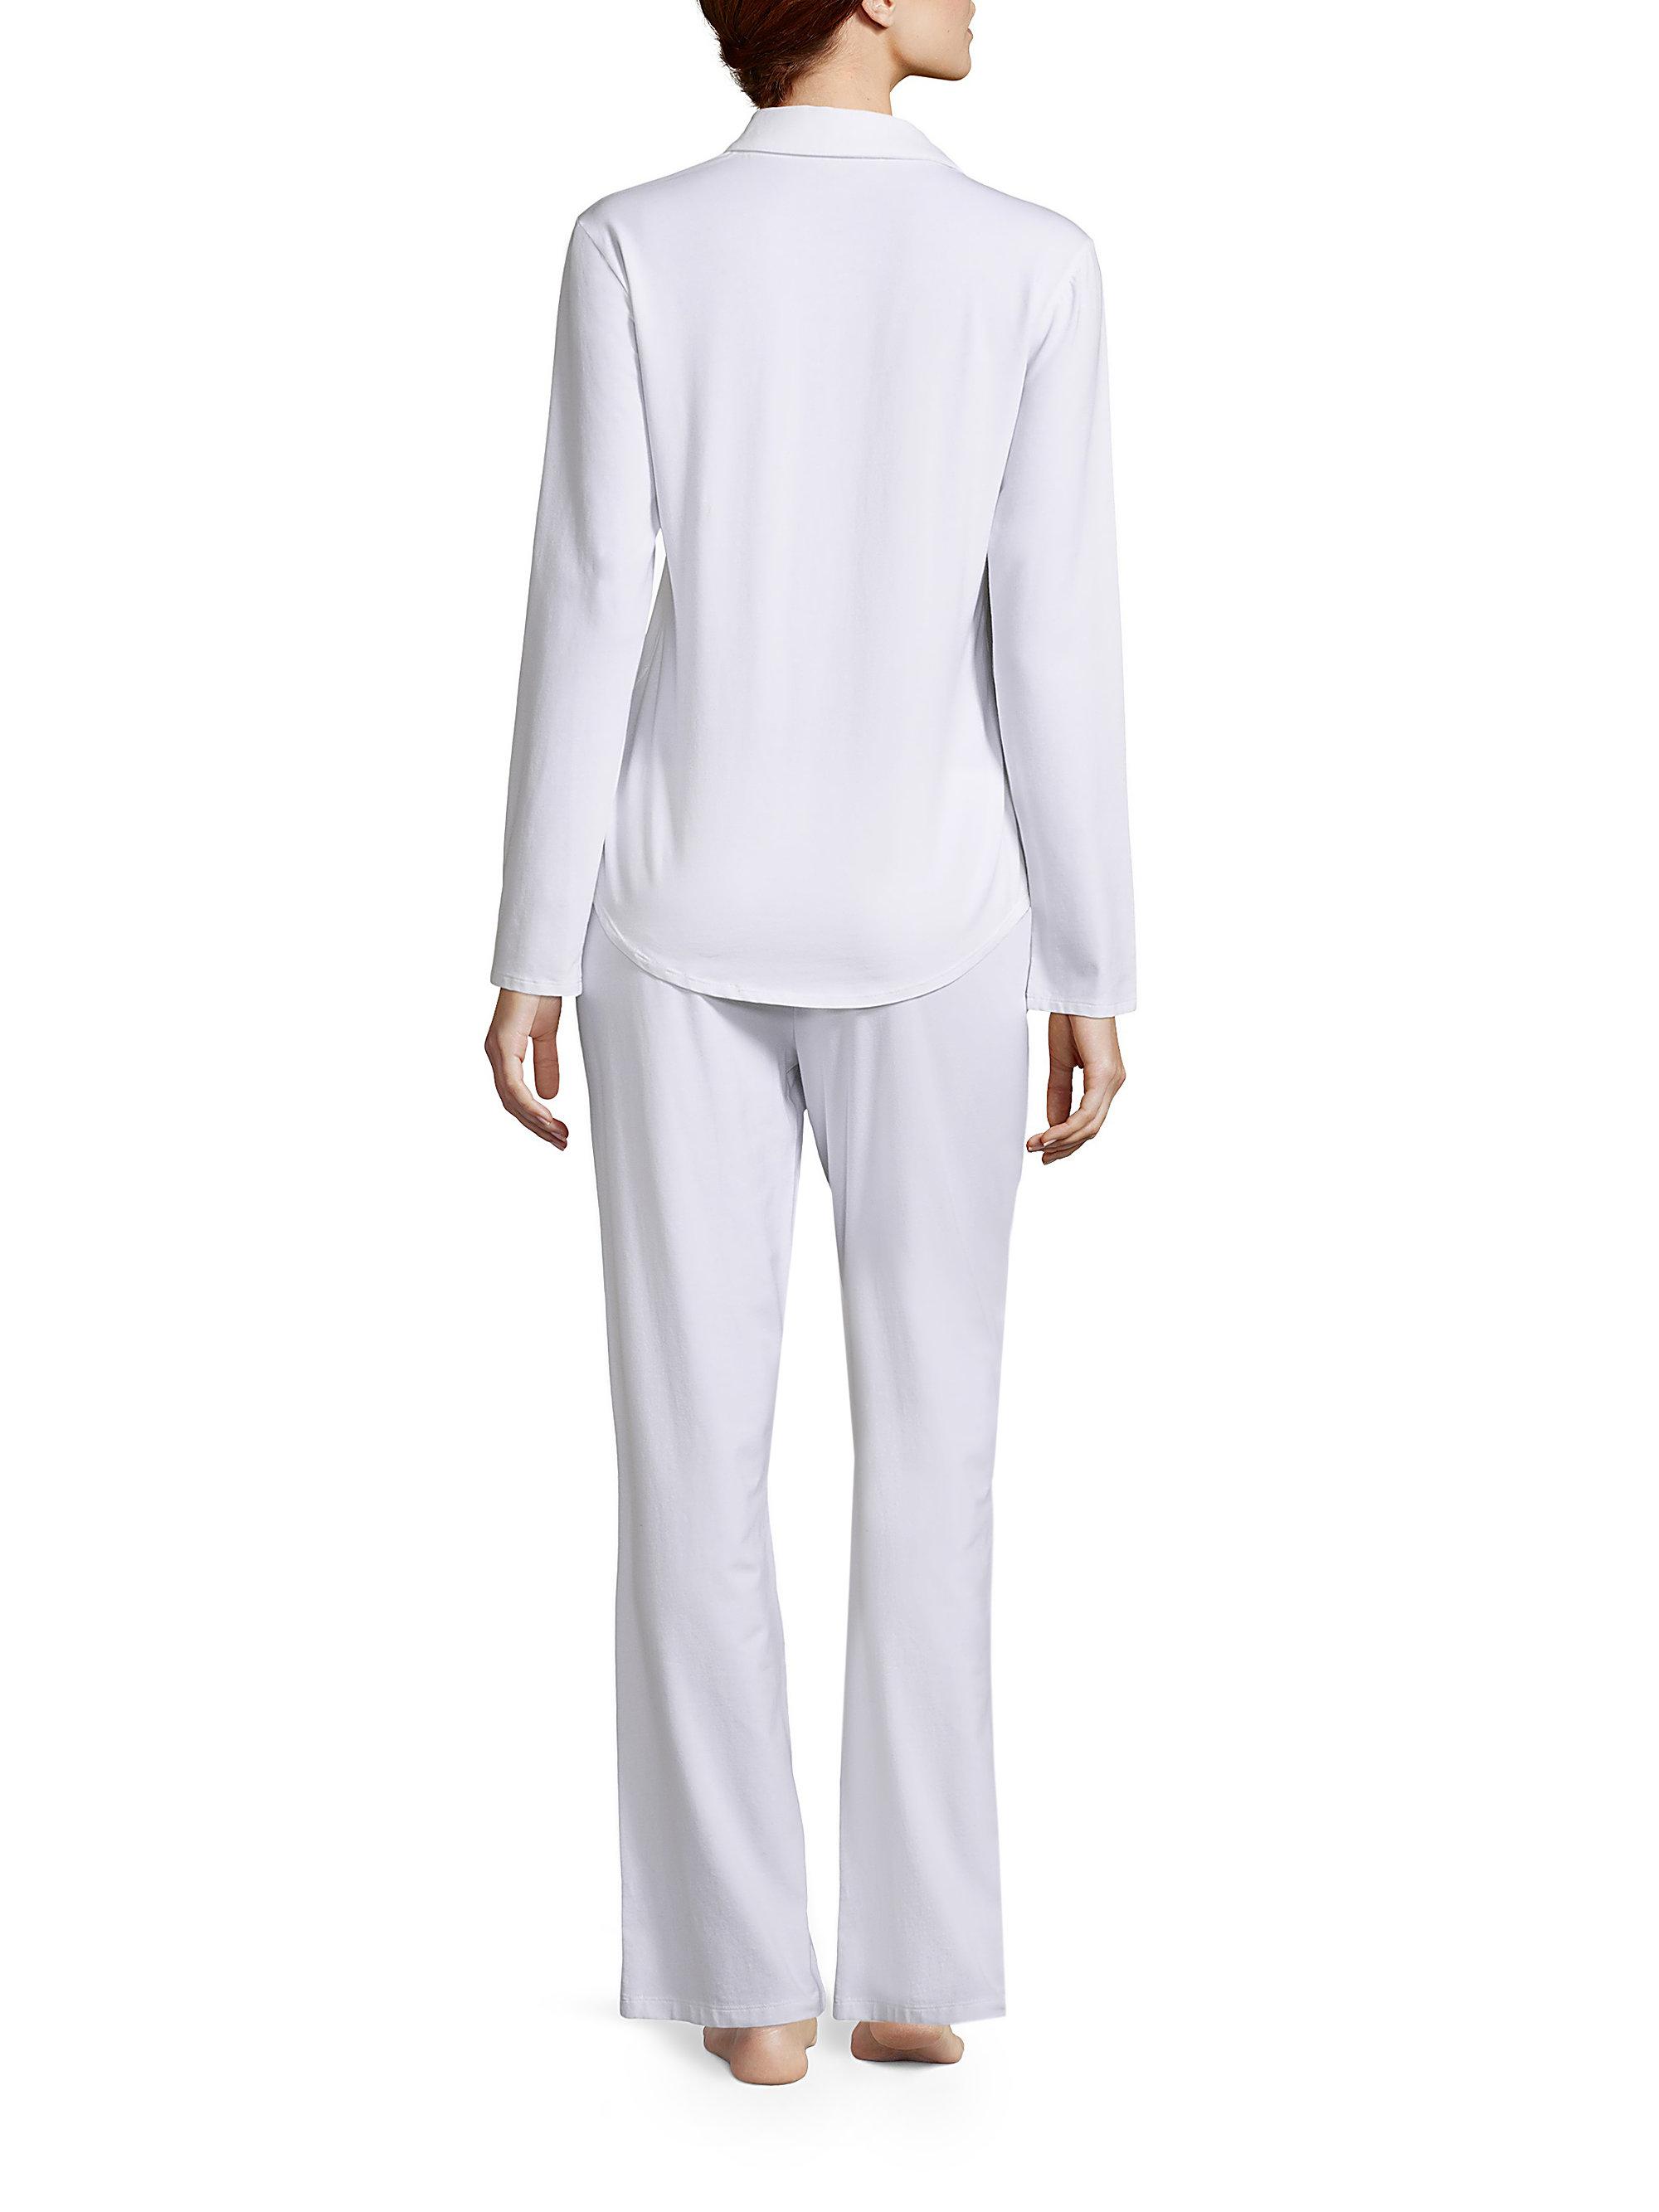 Naked Solid Pajama Set in White - Lyst